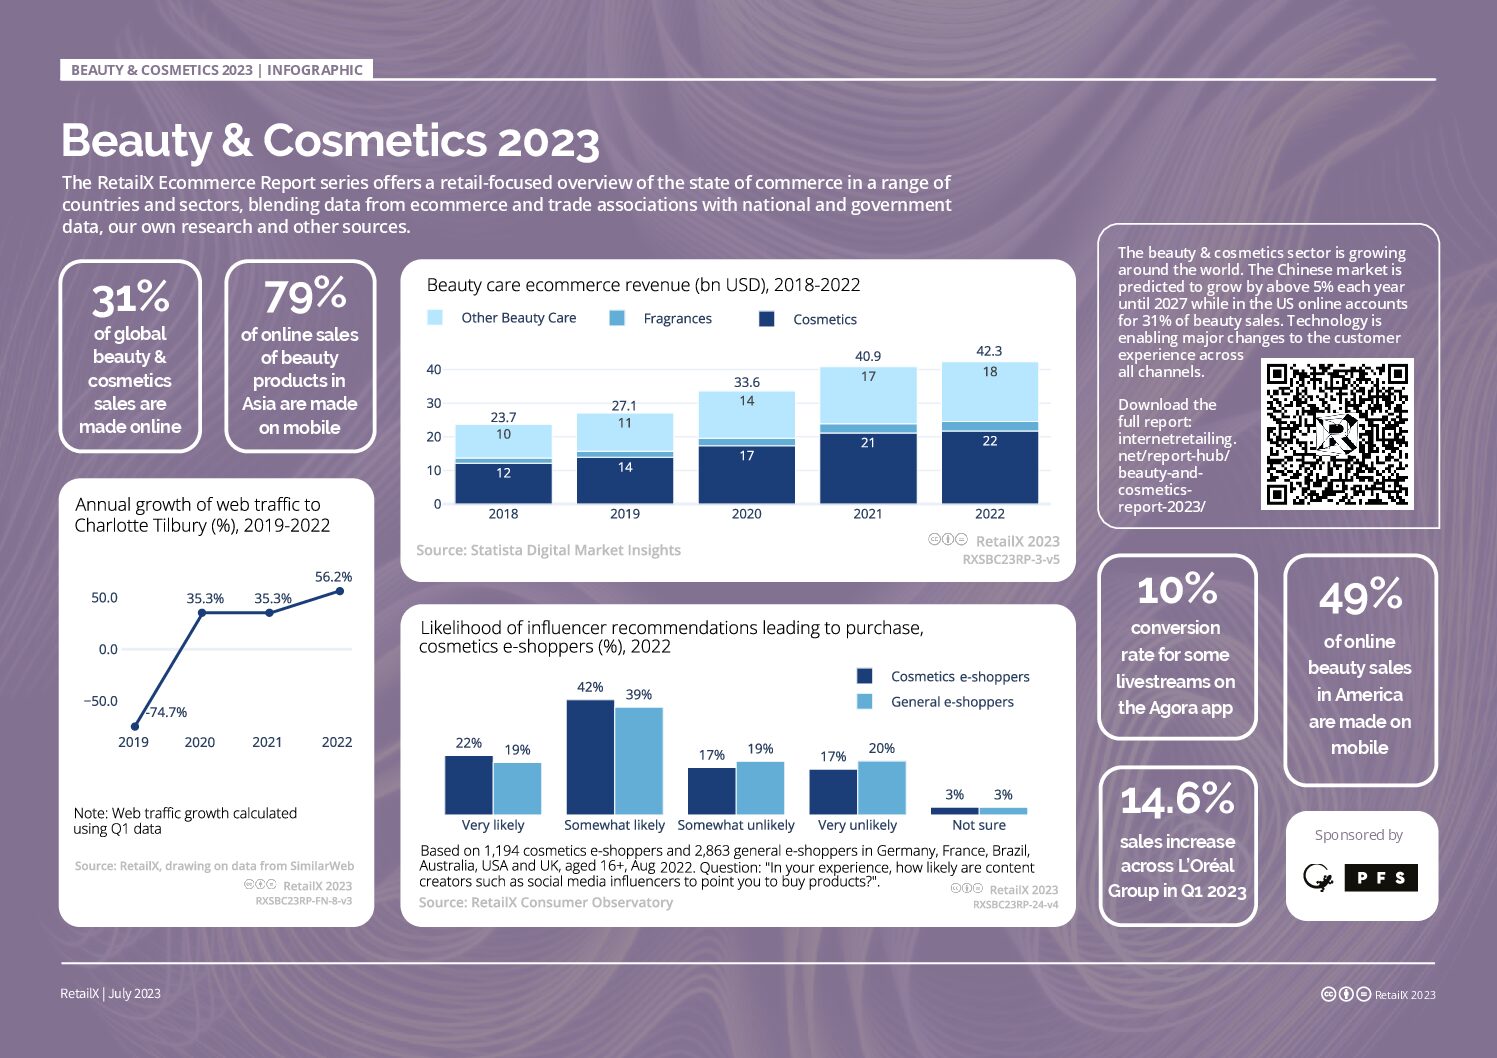 Beauty & Cosmetics Industry – Insight on a retail focused overview 